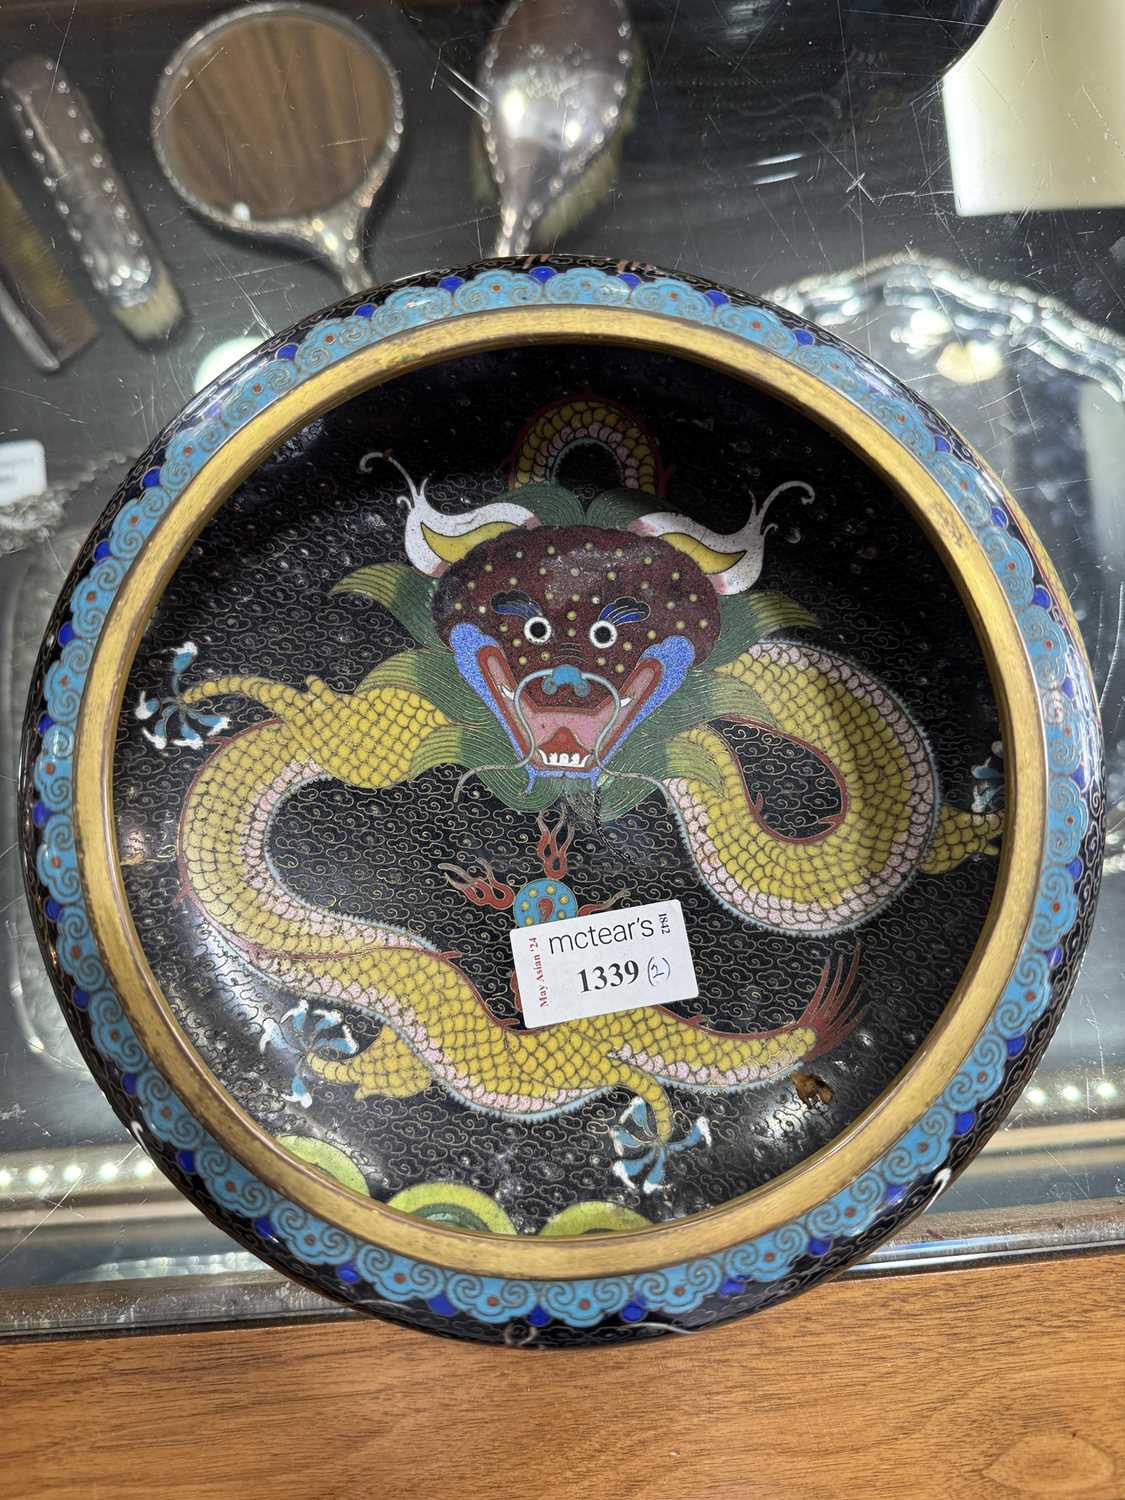 PAIR OF CHINESE CLOISONNE CIRCULAR BOWLS, LATE 19TH CENTURY - Image 8 of 17